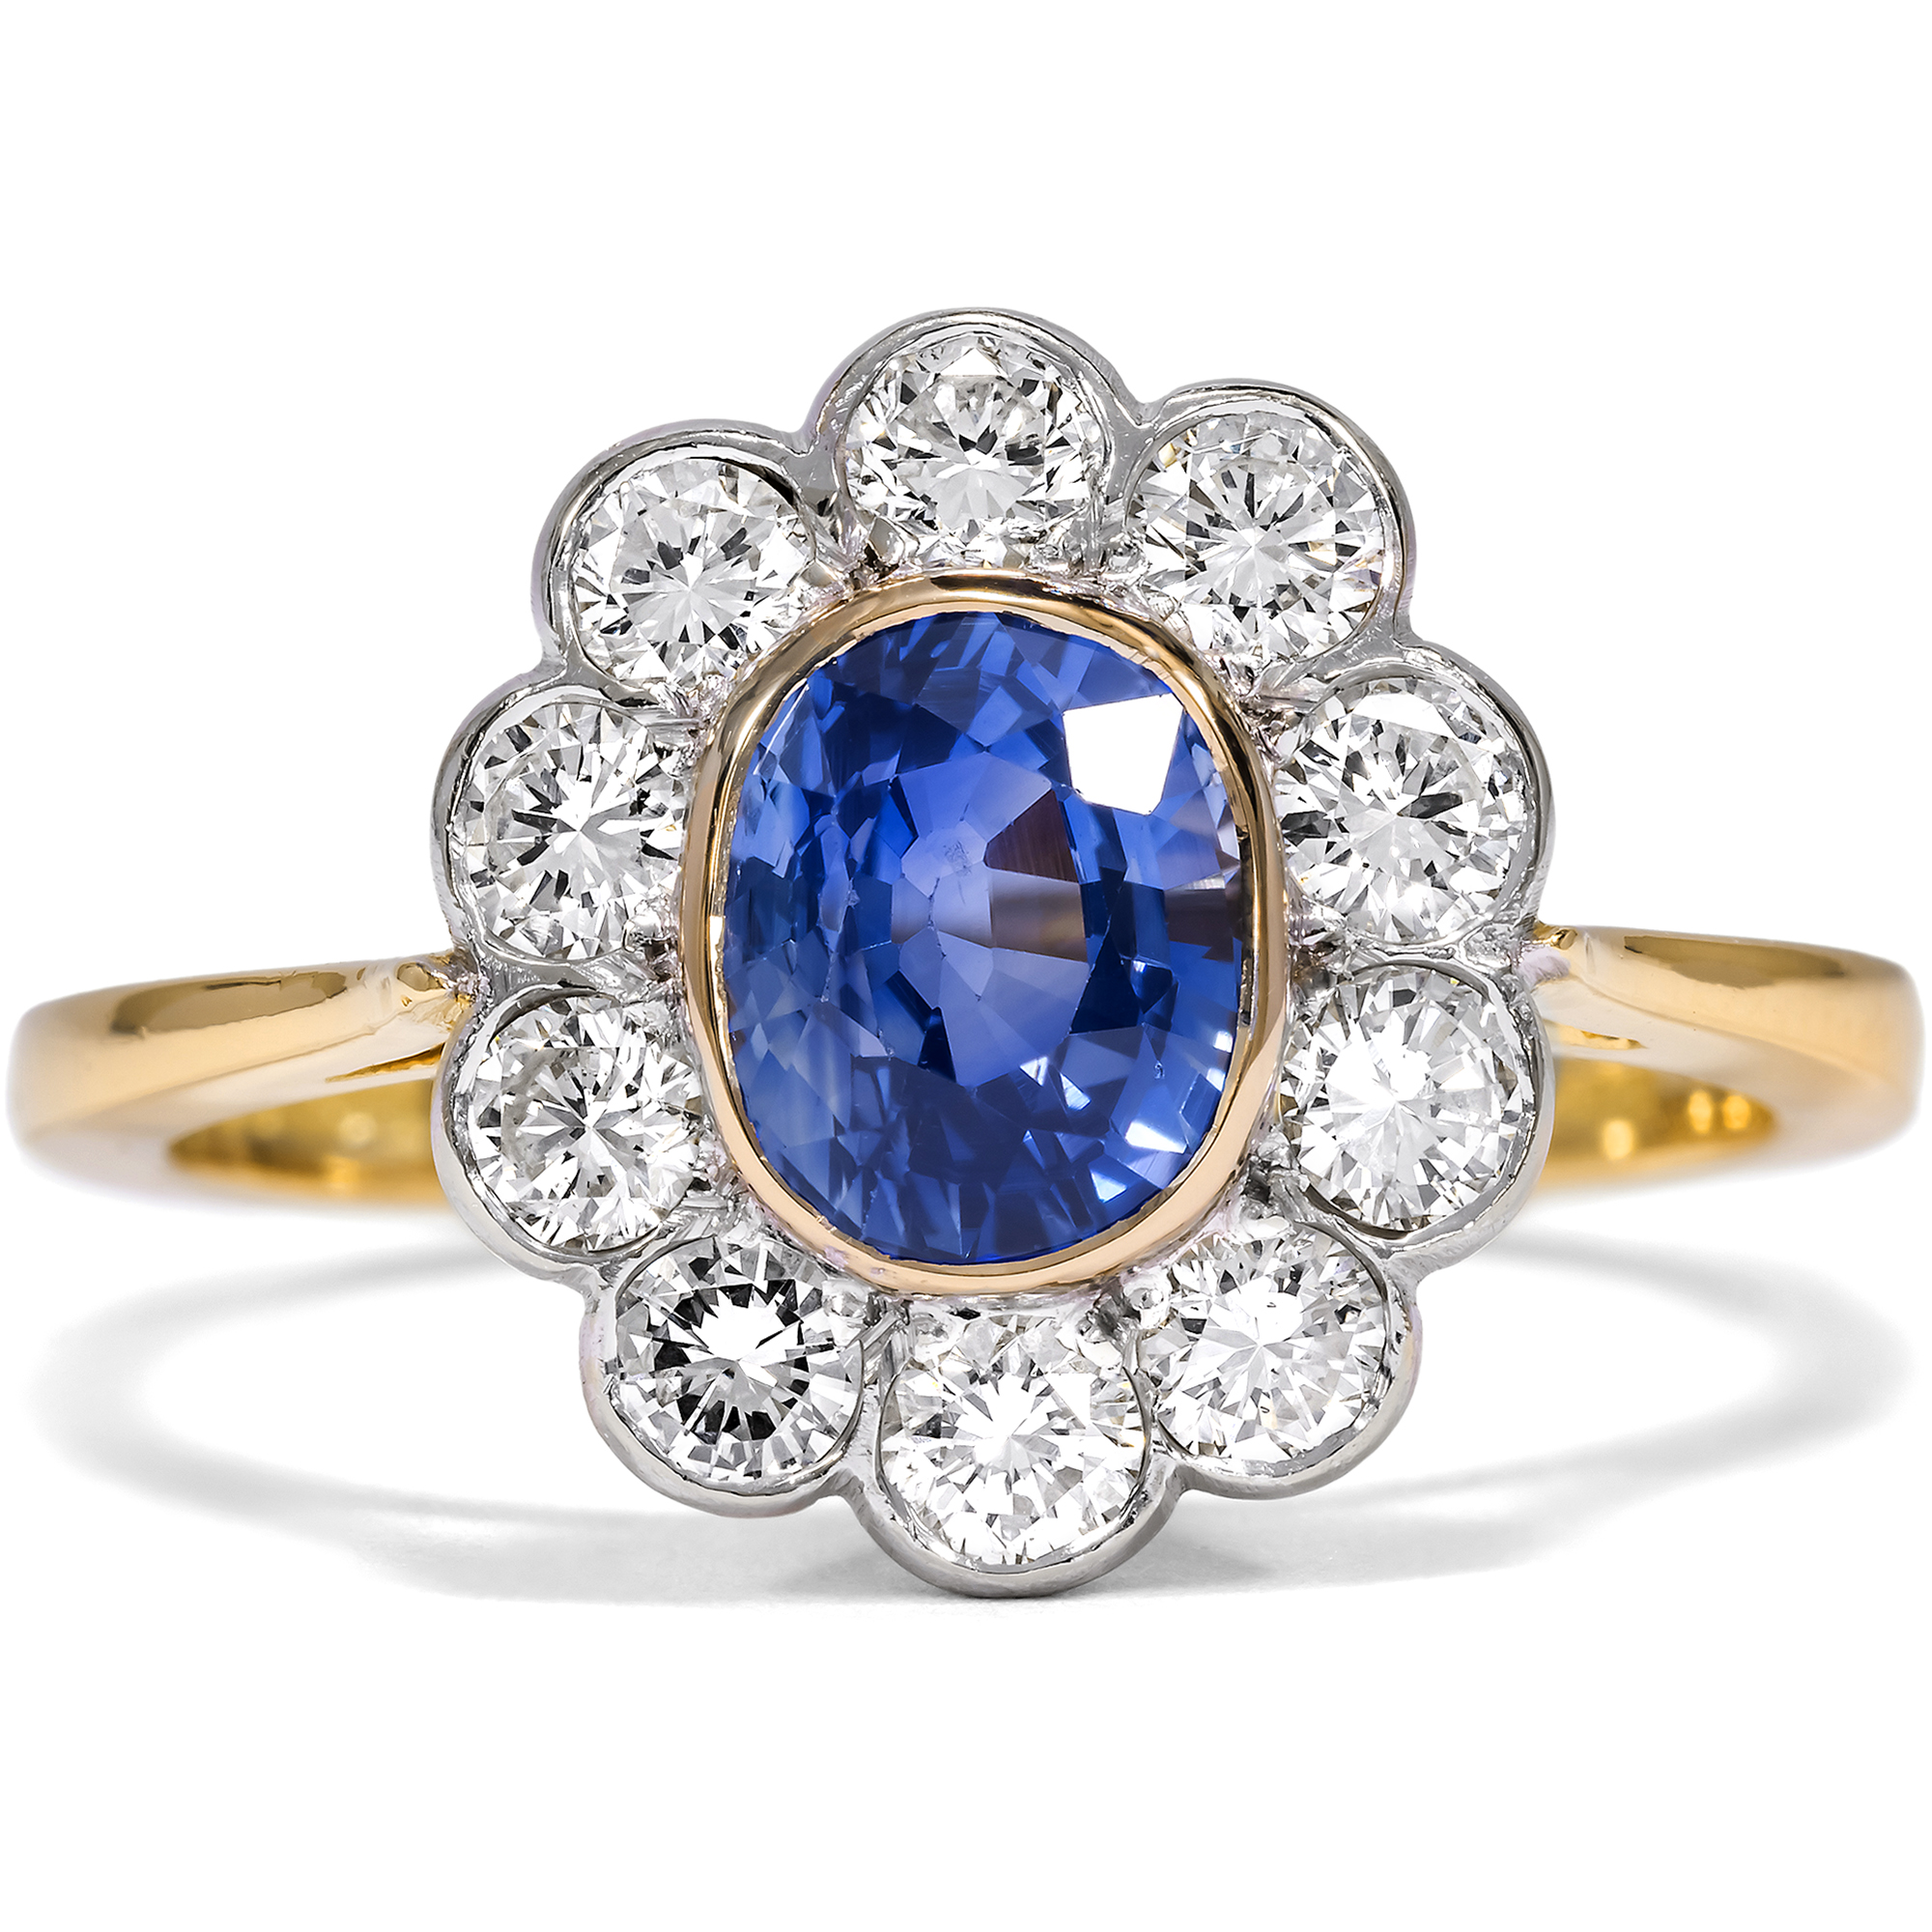 Vintage Ring With Sapphire & Diamonds in Yellow & White Gold, London 1992